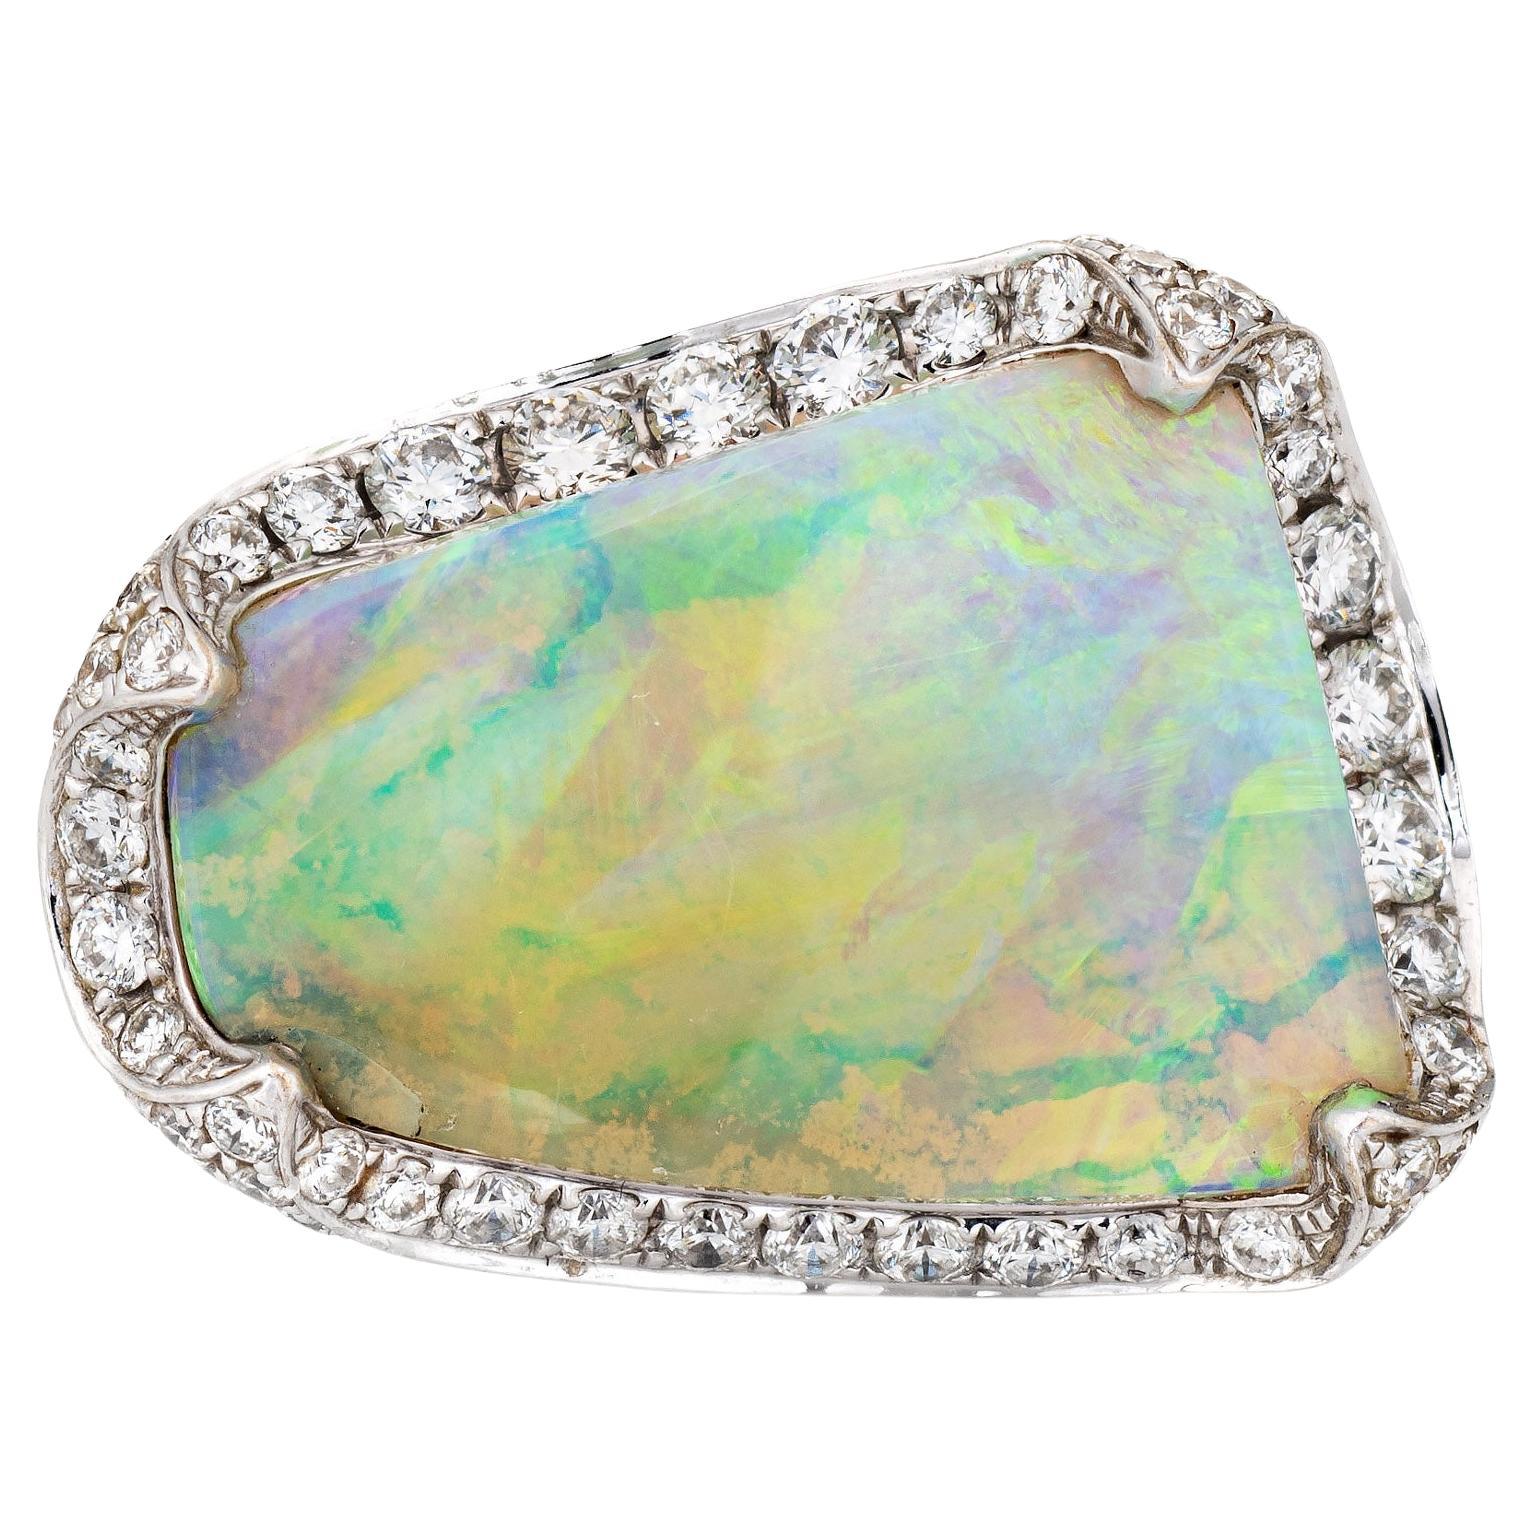 10.64ct Natural Opal Diamond Ring Estate 18k White Gold Sz 7 Fine Jewelry  For Sale